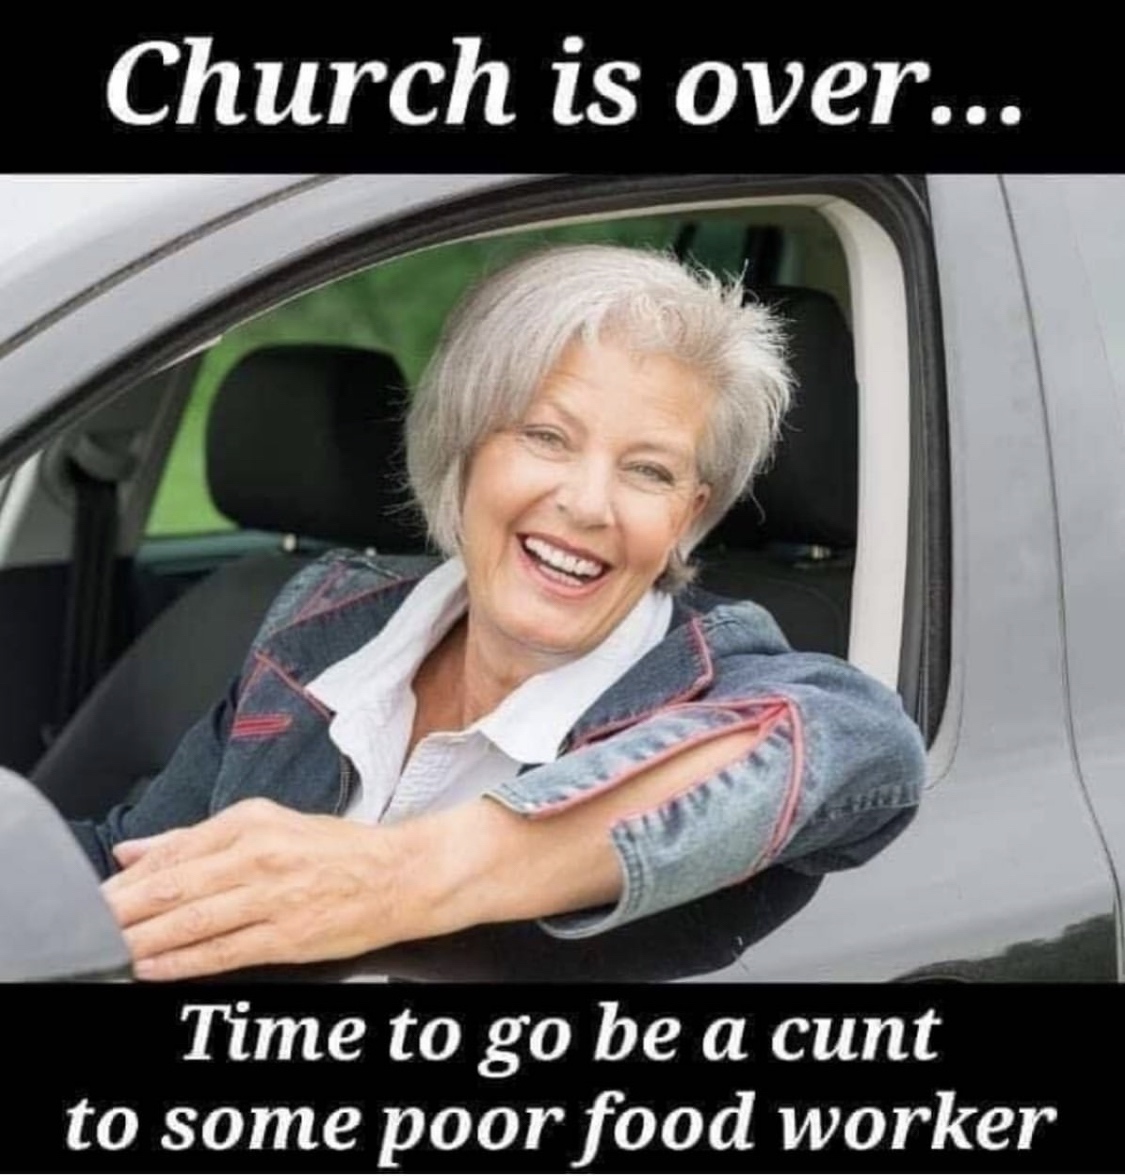 church food worker meme - Church is over... Time to go be a cunt to some poor food worker